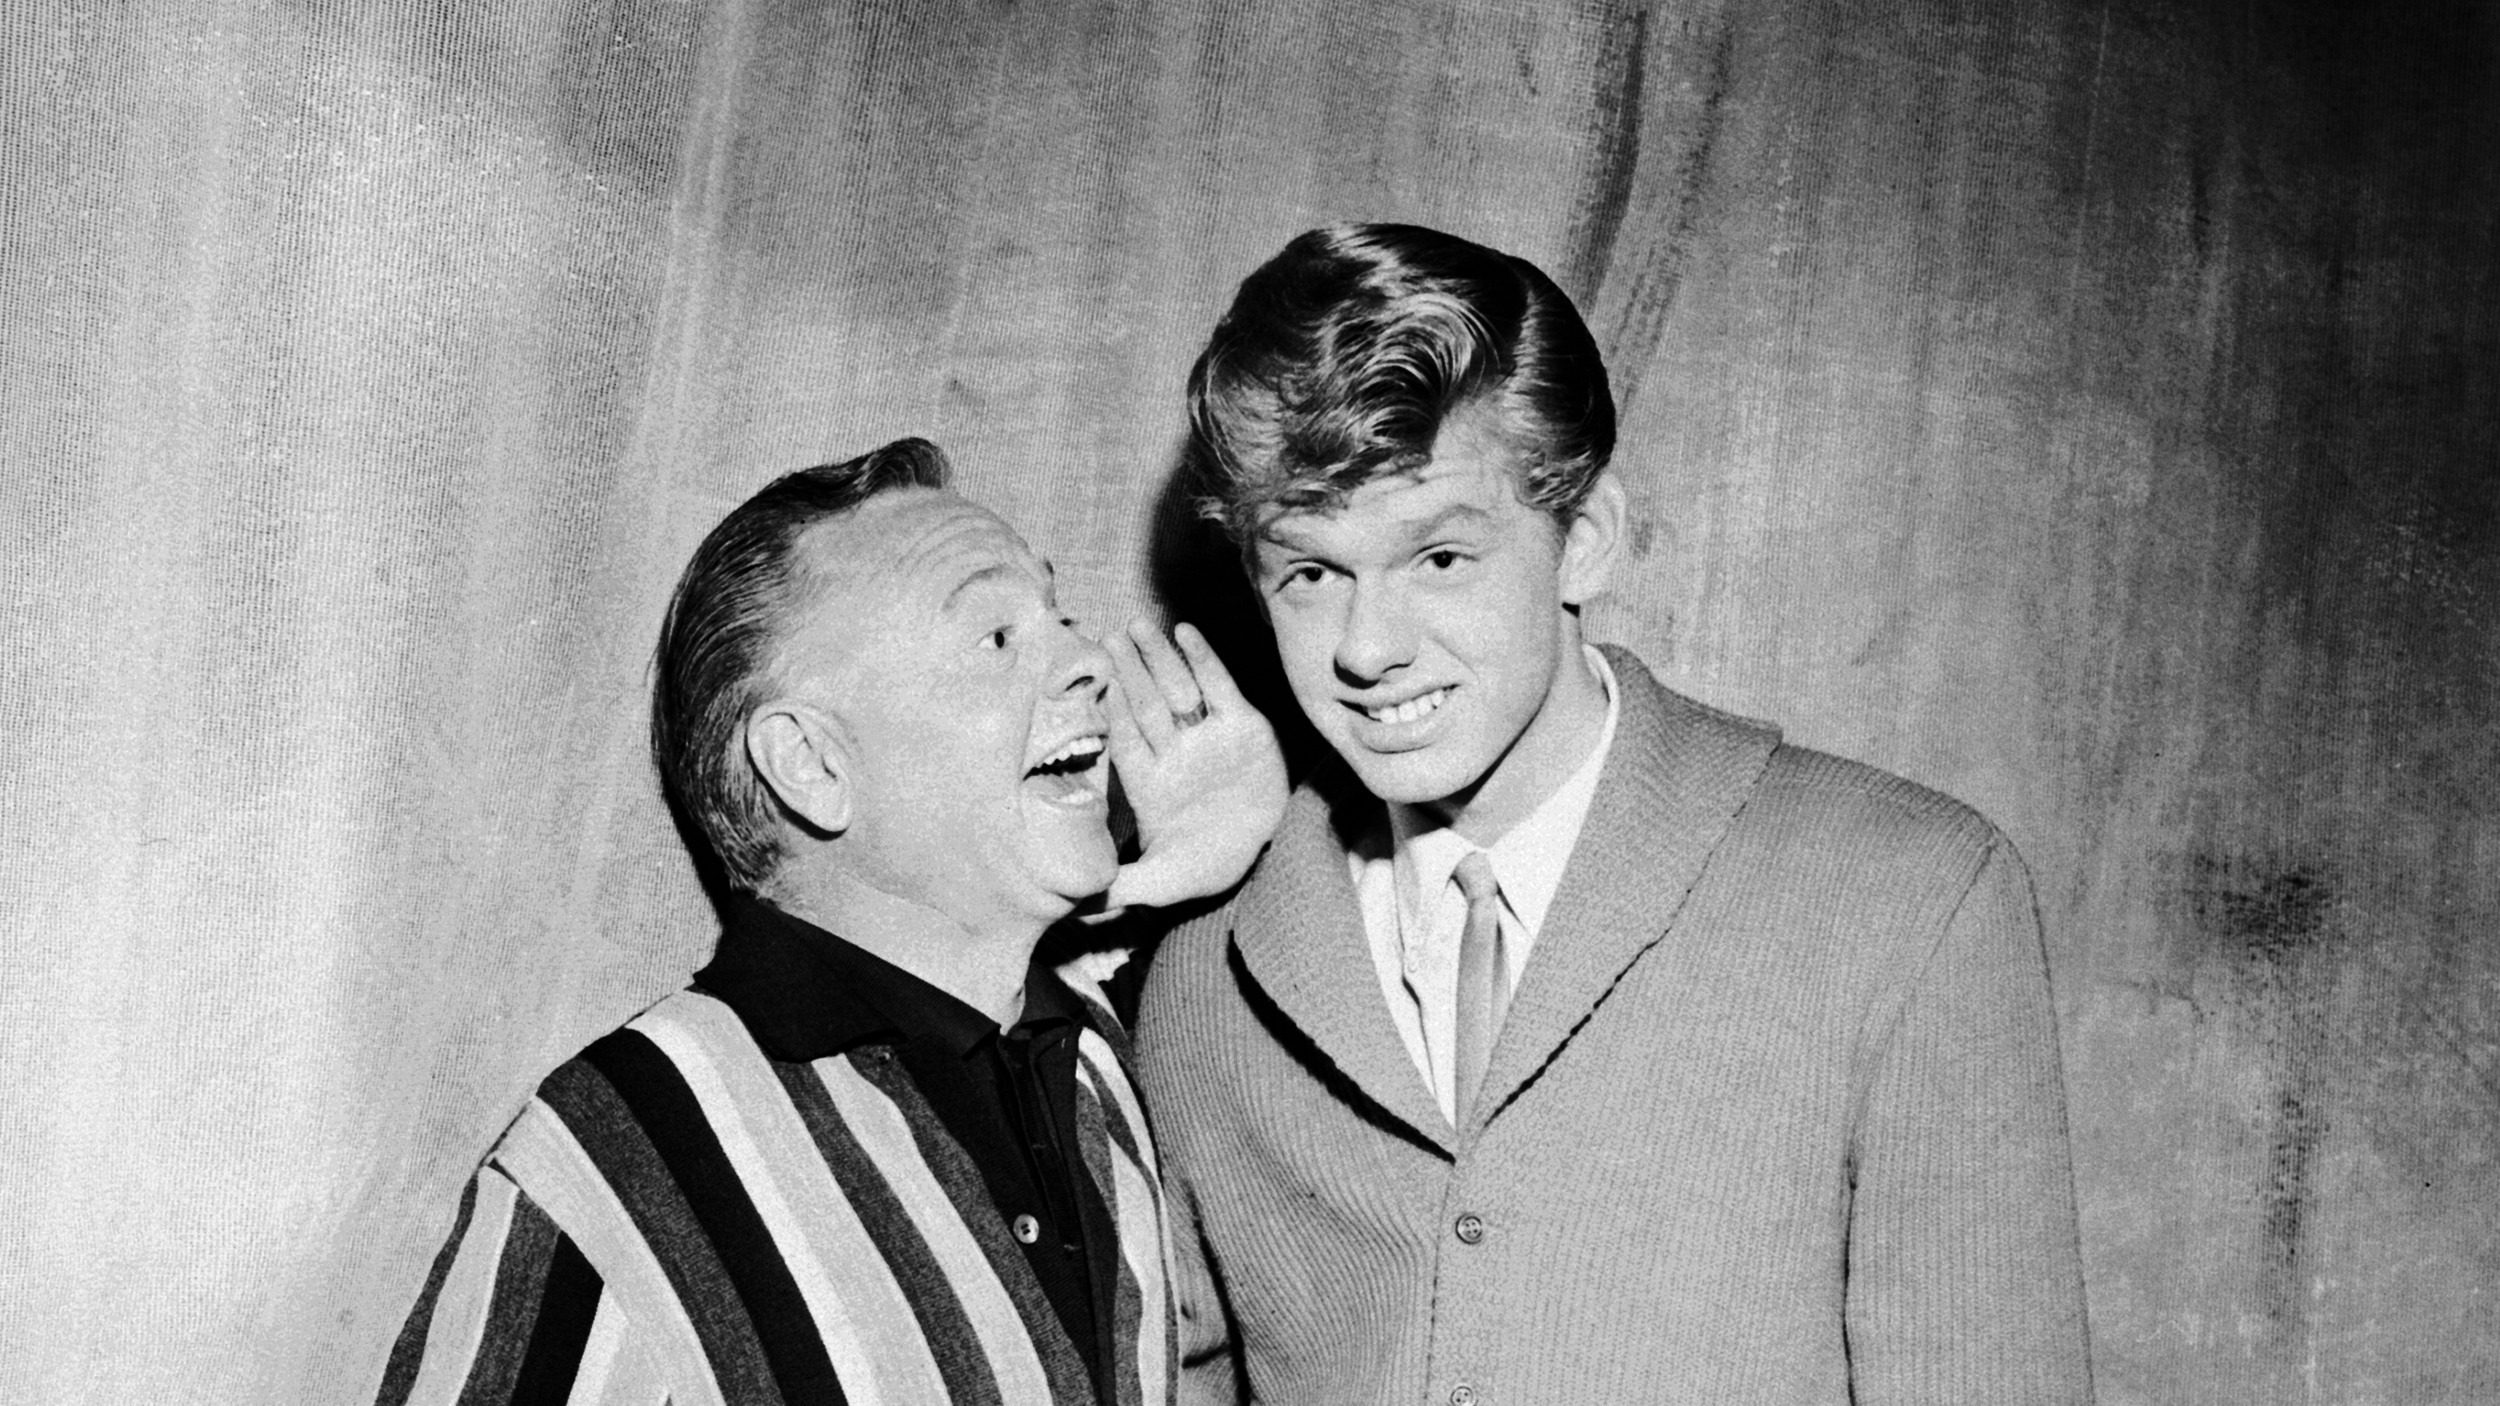 Black and white photo of an older man in a striped jacket whispering to a grinning young man in a suit.